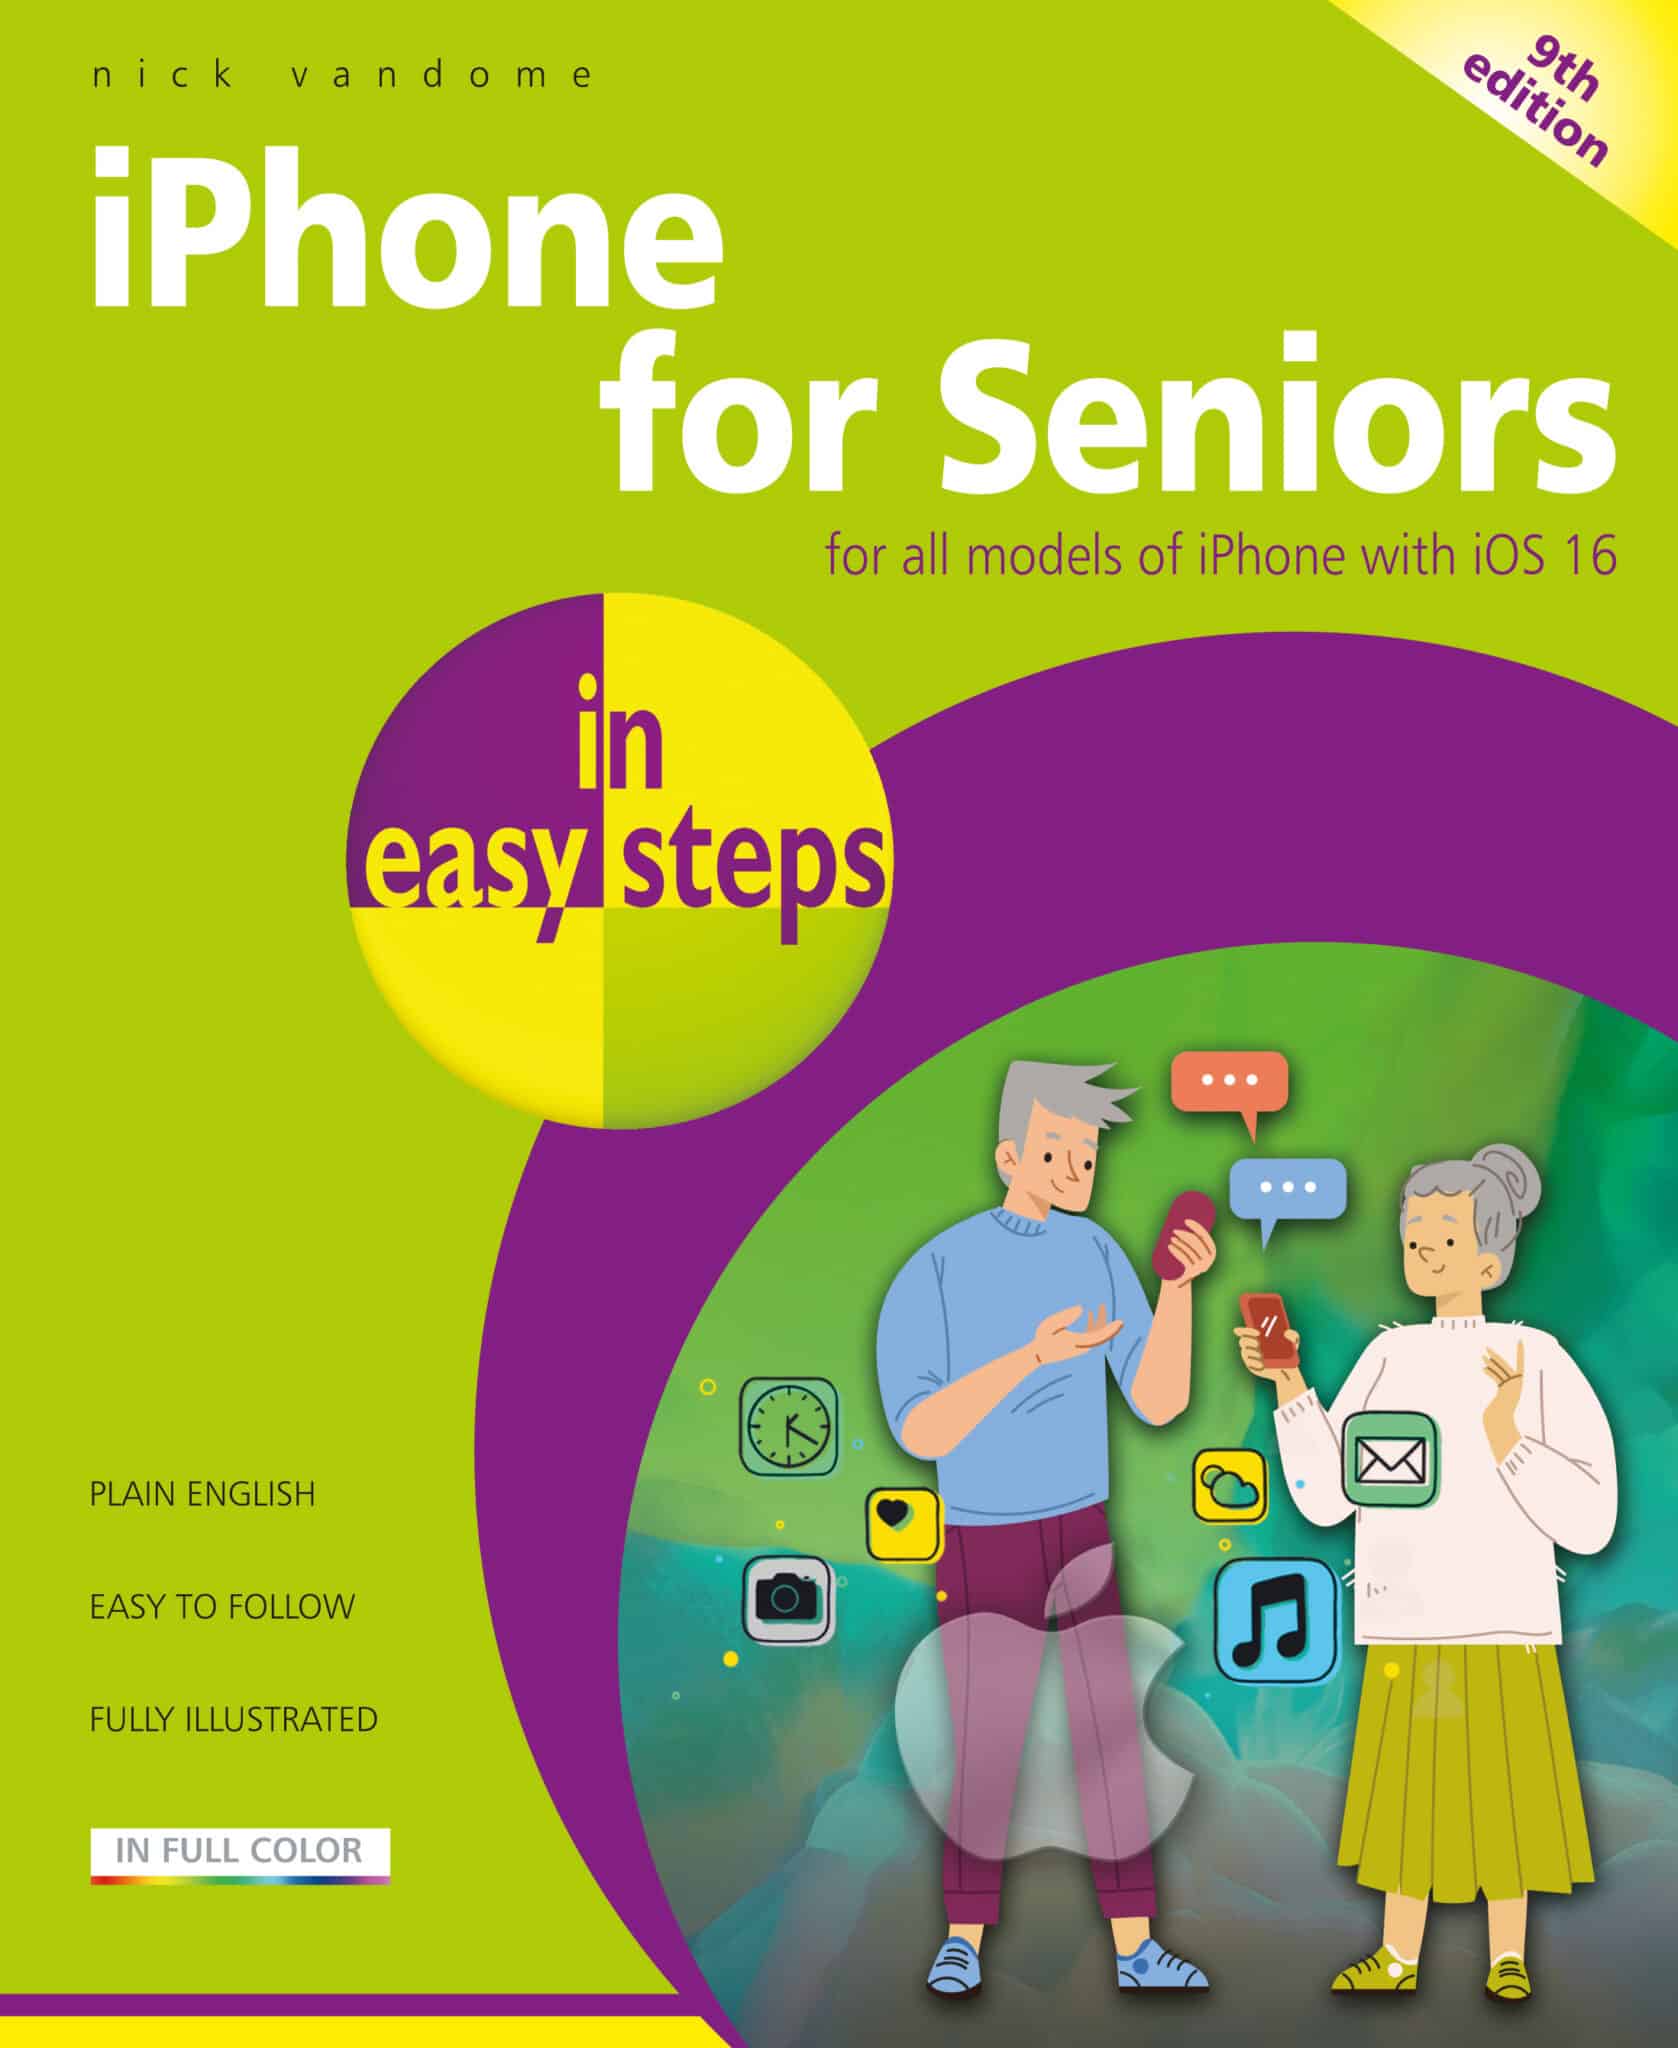 https://ineasysteps.com/products-page/iphone-for-seniors-in-easy-steps-9th-edition/